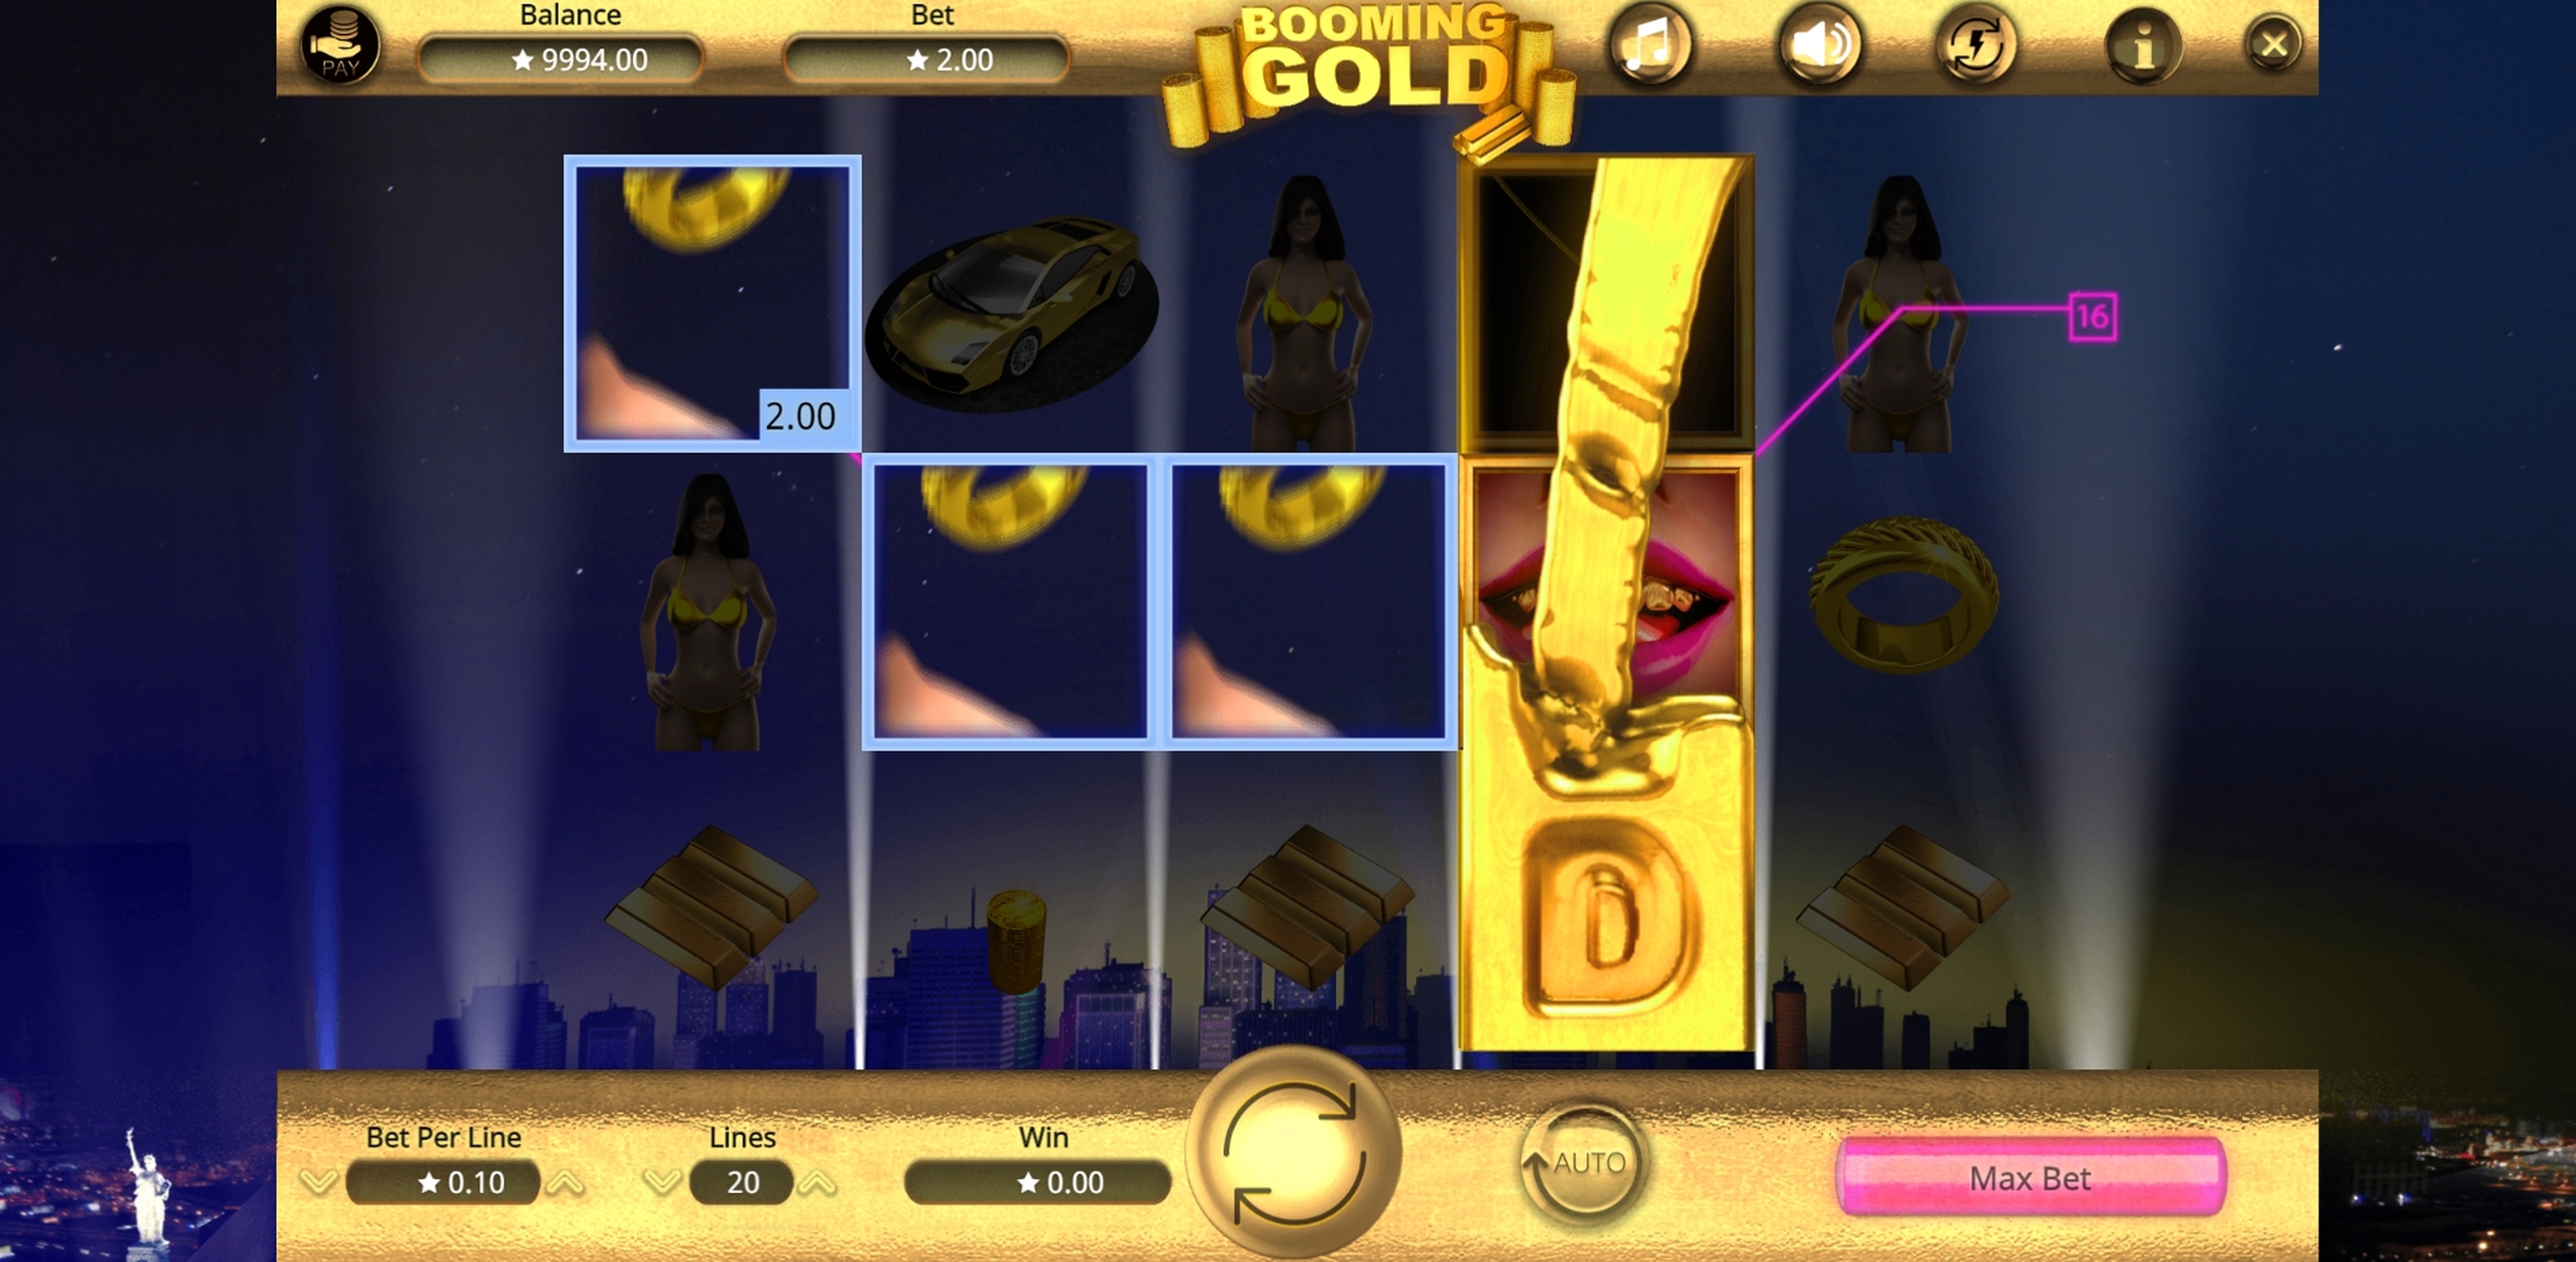 Win Money in Booming Gold Free Slot Game by Booming Games